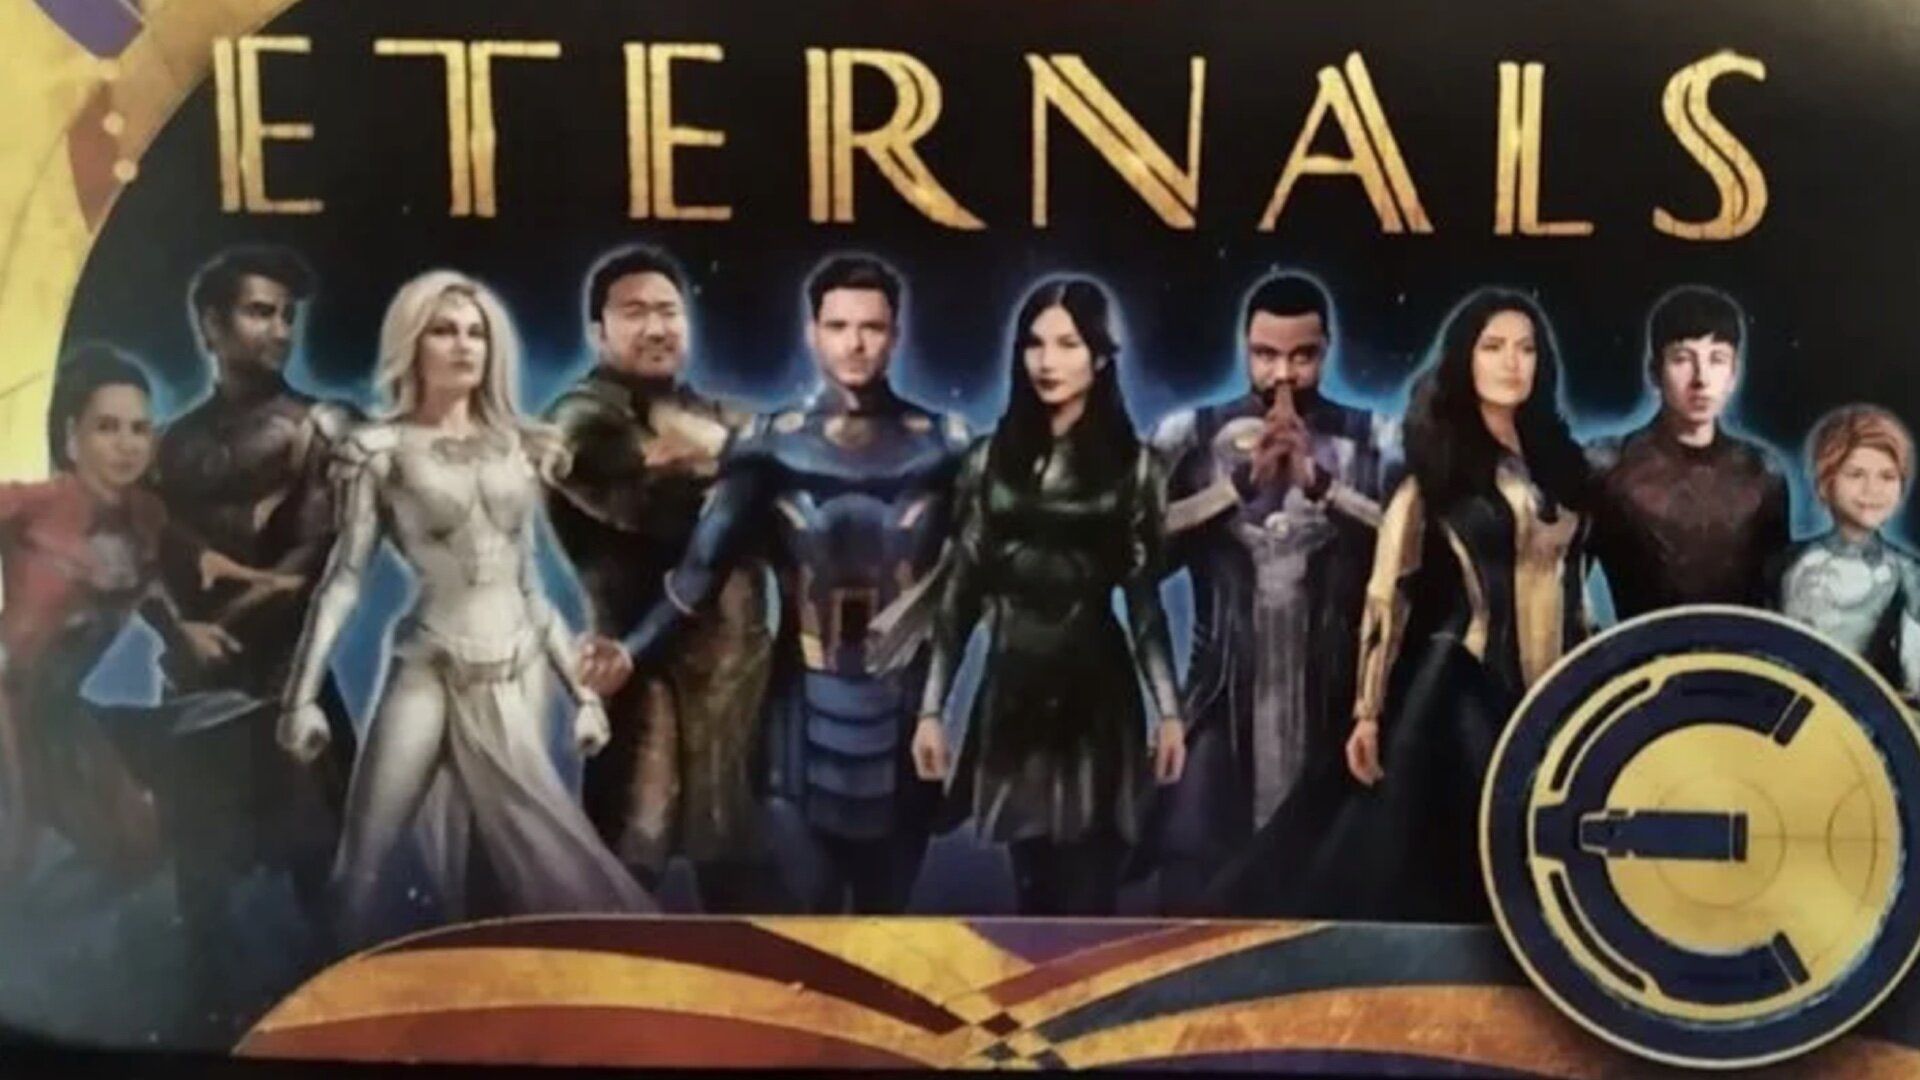 New Promo Art Surfaces For Marvel's ETERNALS Features The Characters in Costume